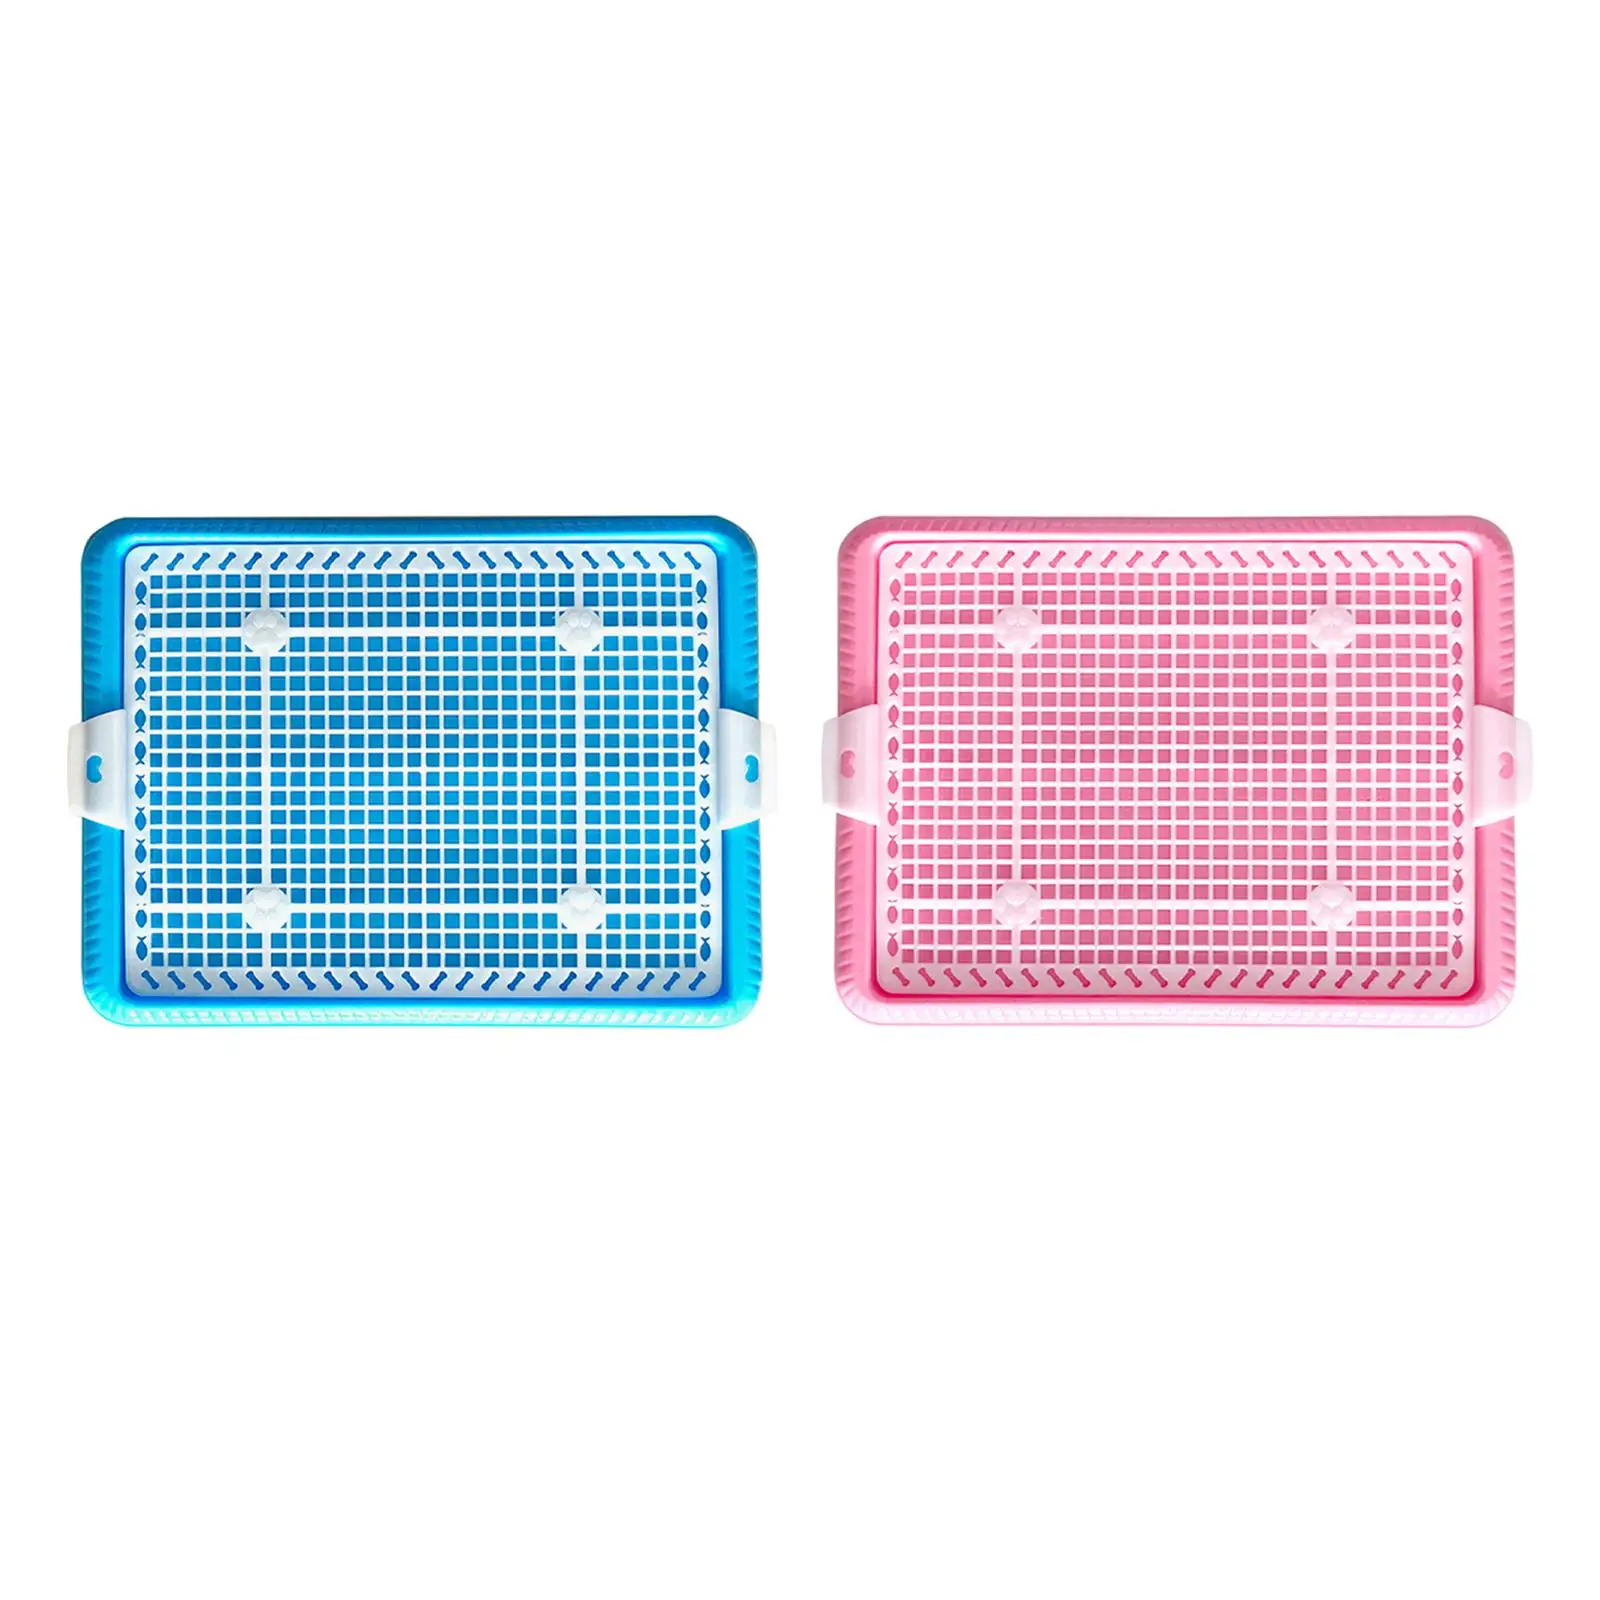 Dog Litter Boxes Indoor Easy to Clean Anti Slip Mesh Training Potty Pan Potty